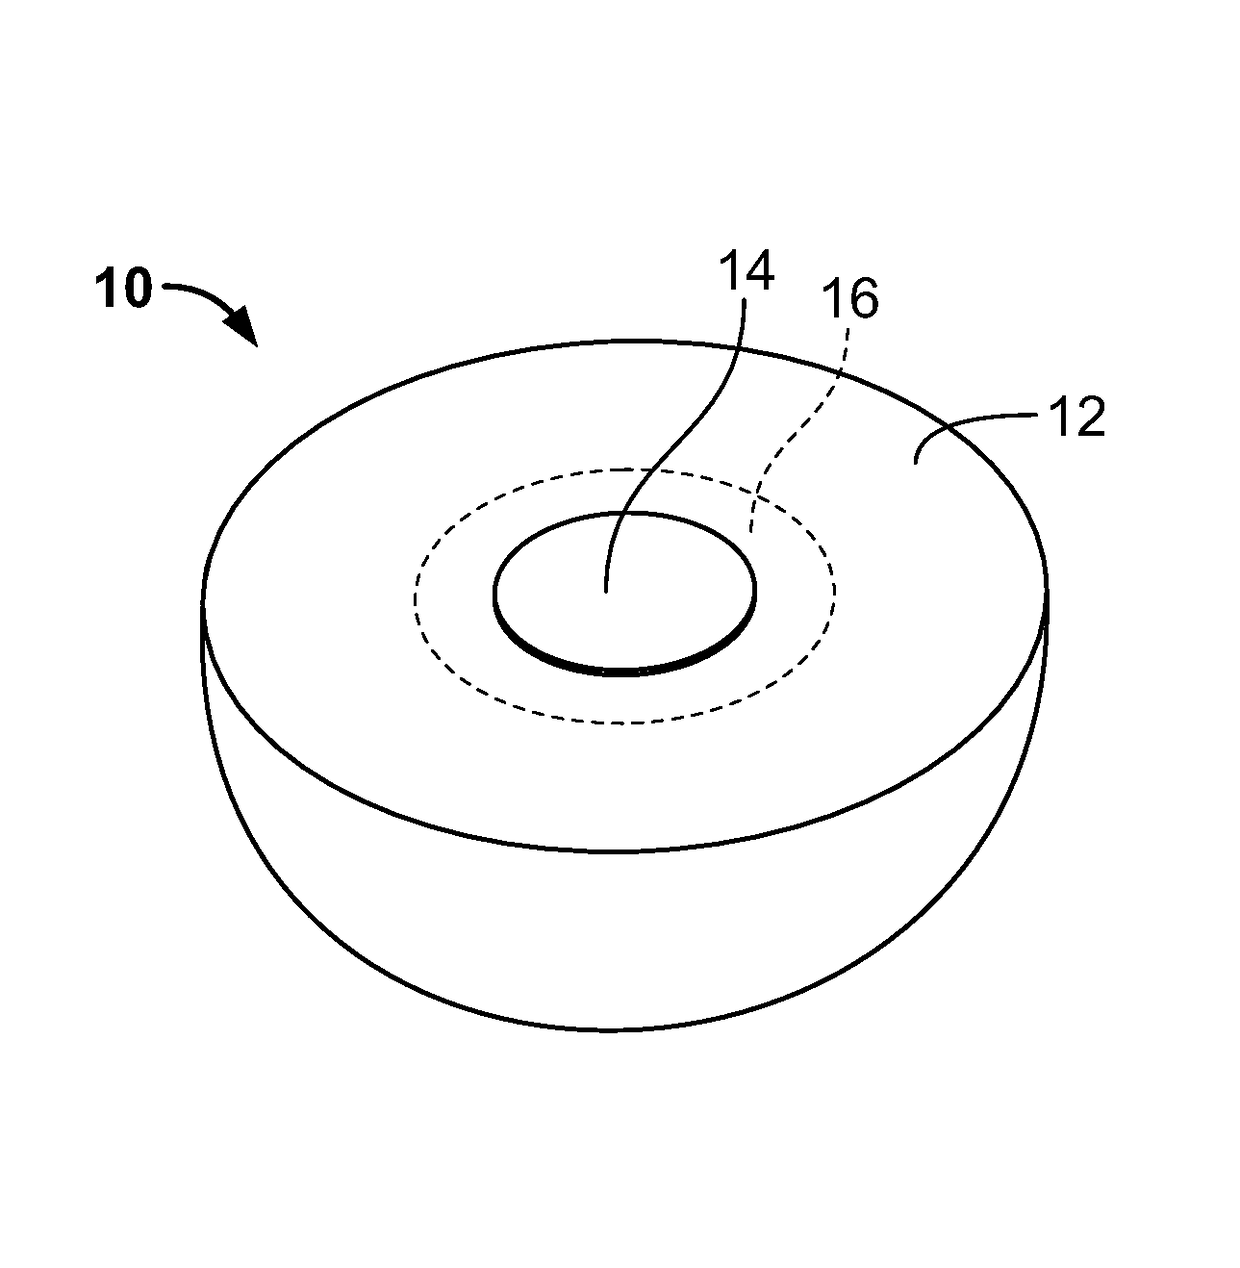 Tissue expander implant with self-sealing safety patch